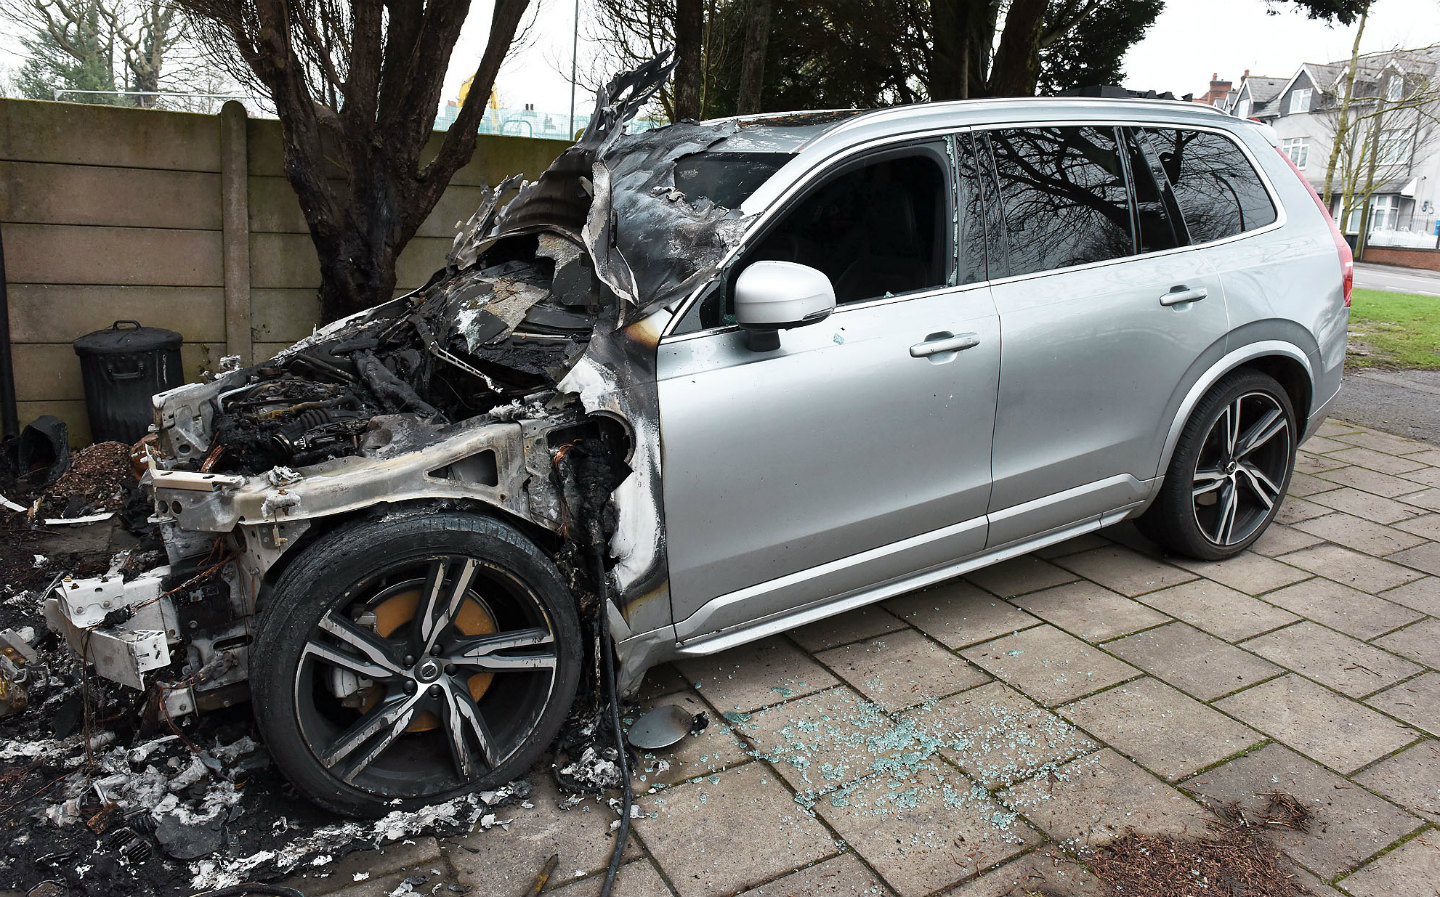 Fire destroys plug-in hybrid Volvo XC90 while charging